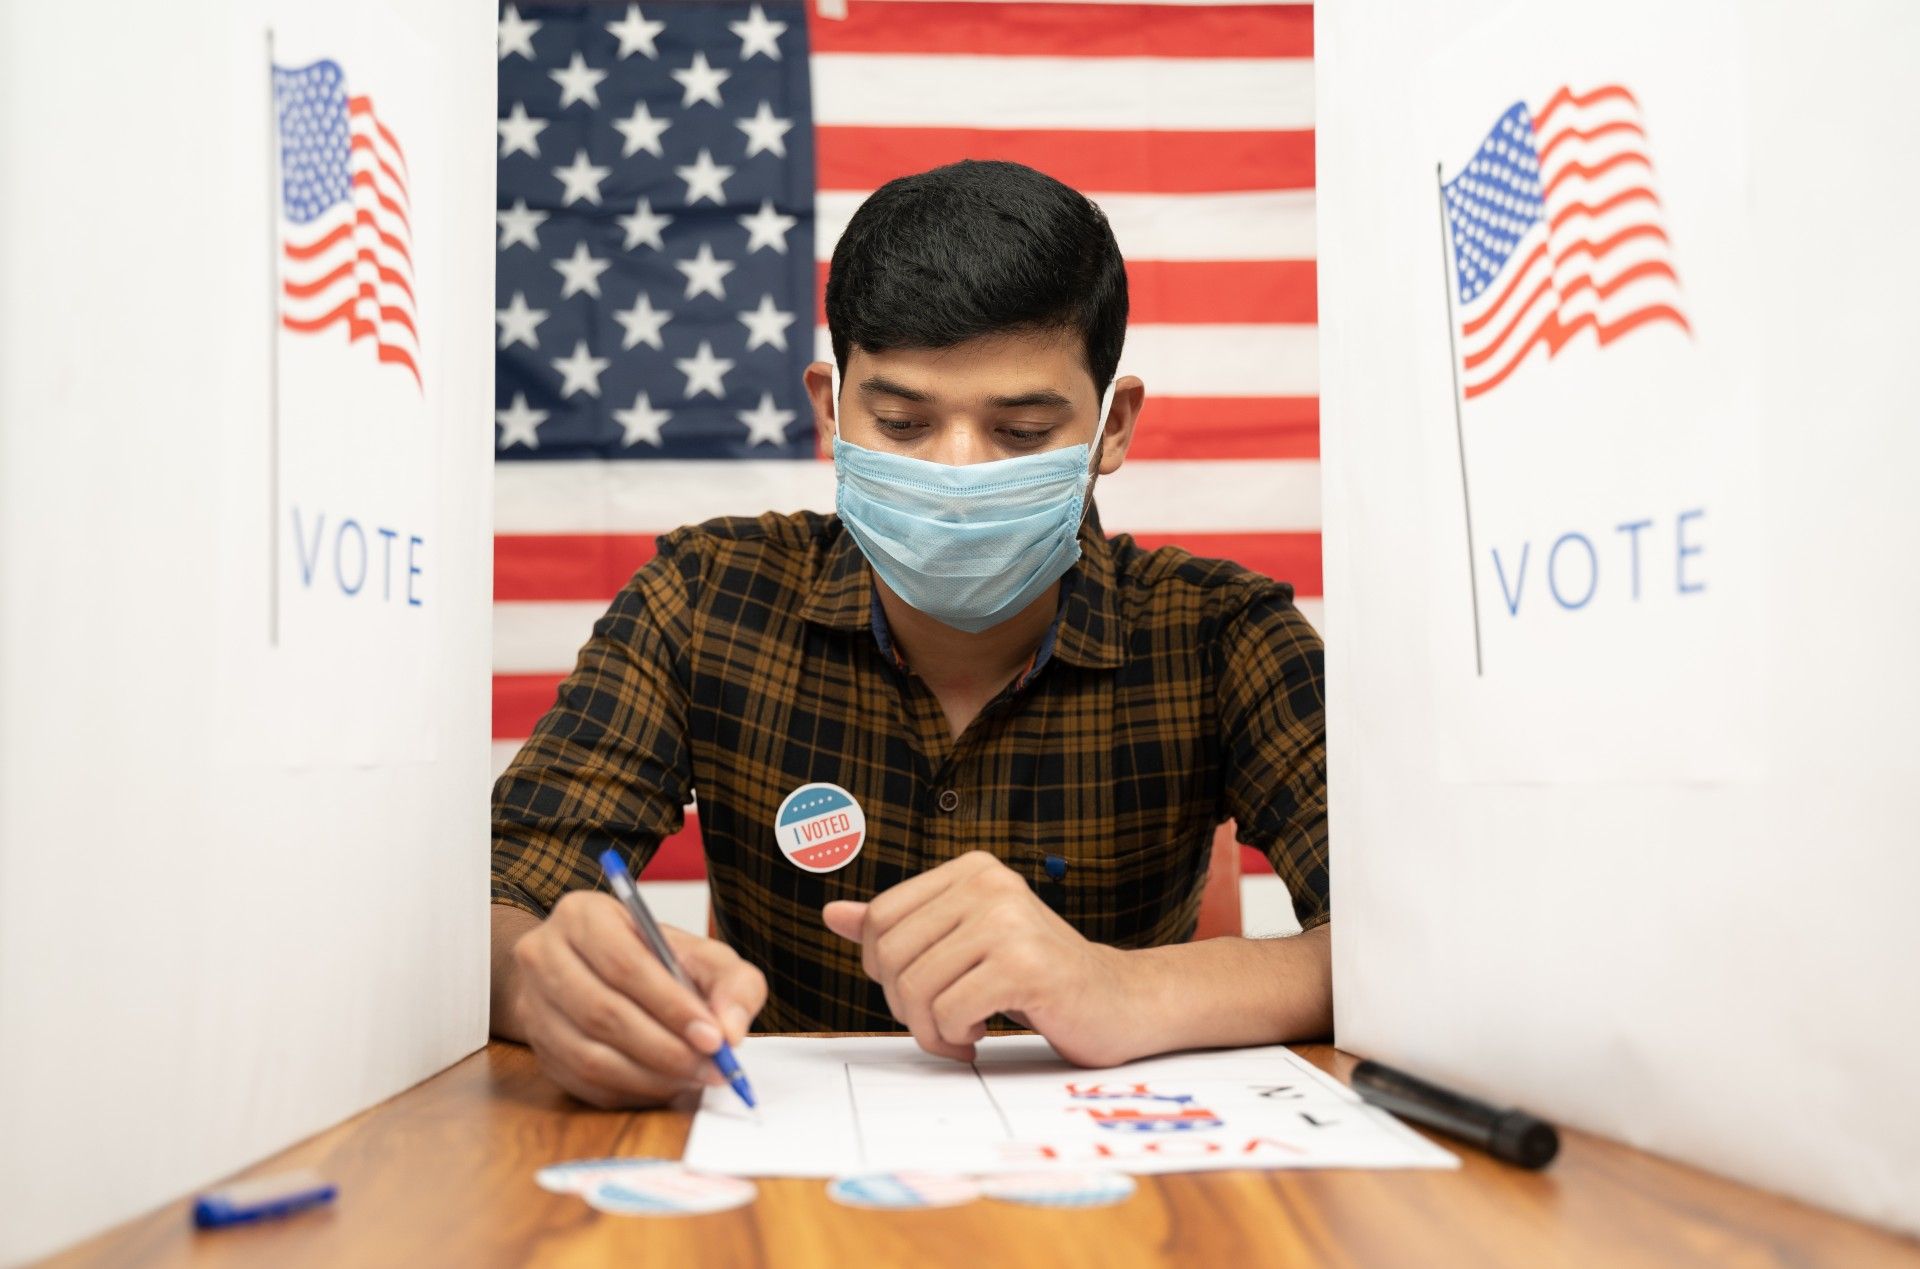 A man sits in a polling booth to vote while wearing a mask, with an American flag backdrop - arkansas voters